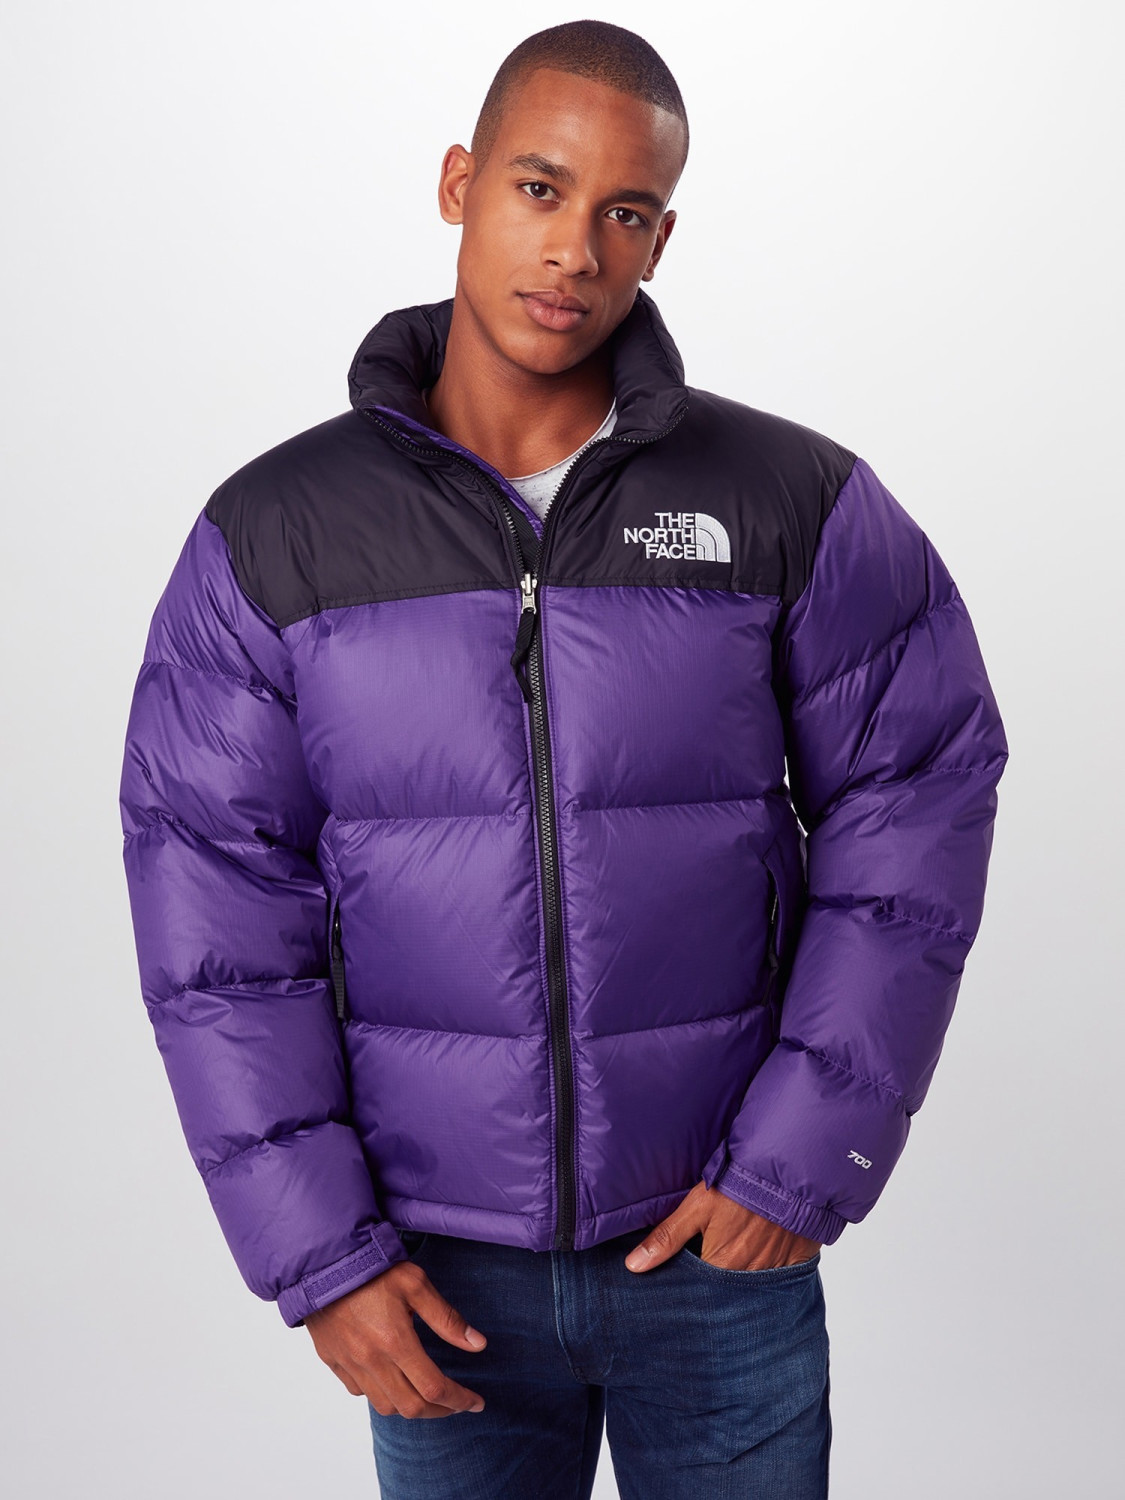 Buy The North Face 1996 Retro Nuptse Jacket purple from £315.00 (Today ...